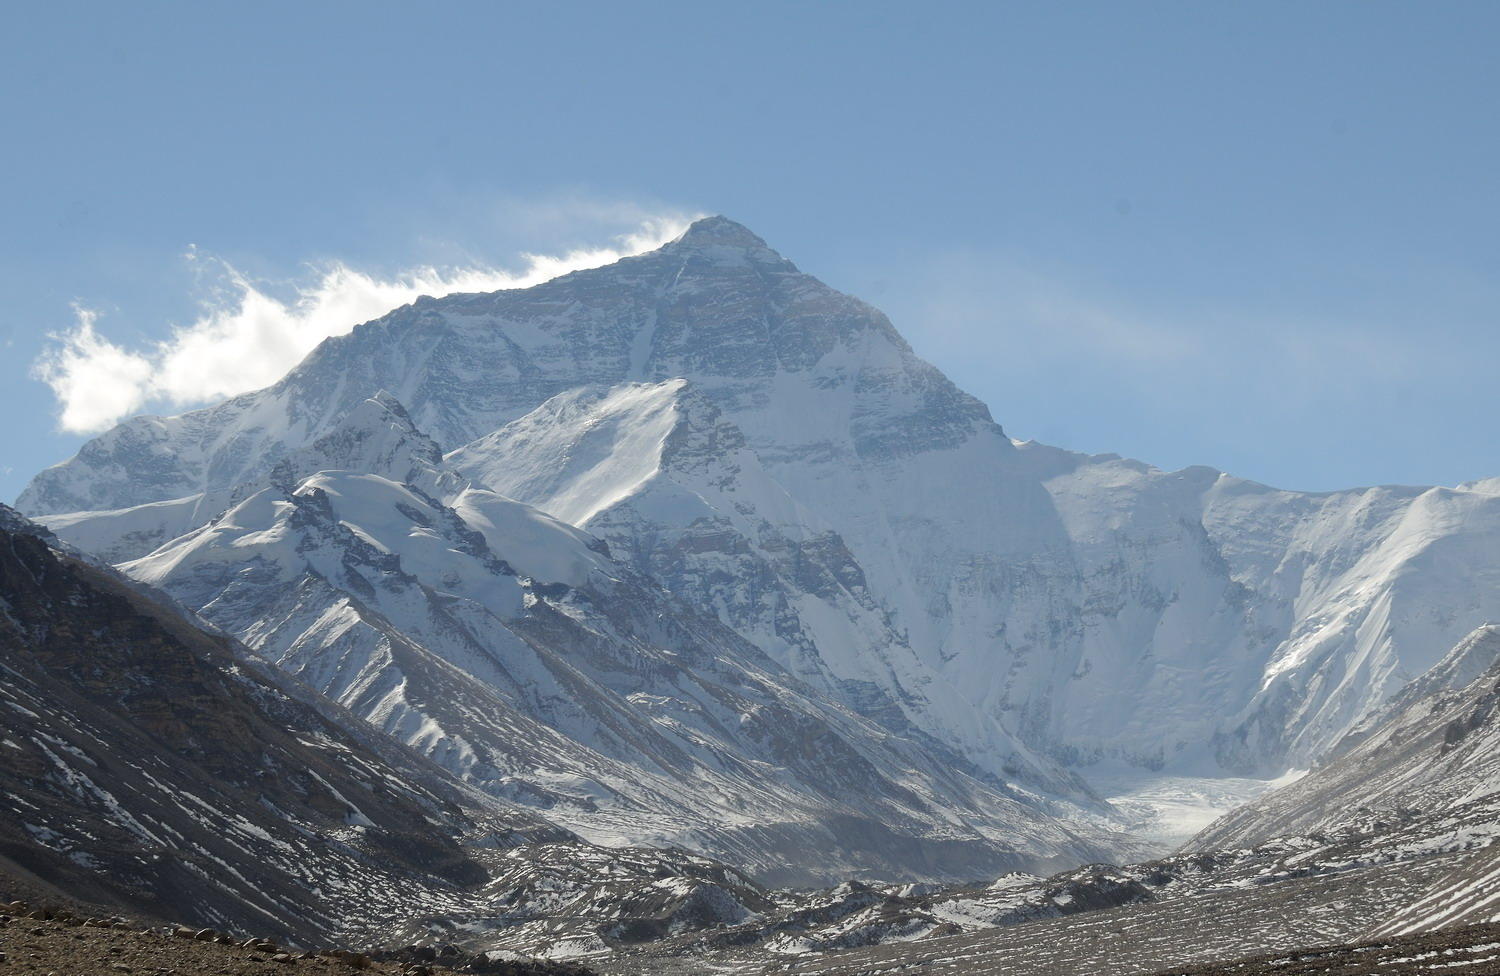 DSC_1485A1 - The North Face, Mt. Everest